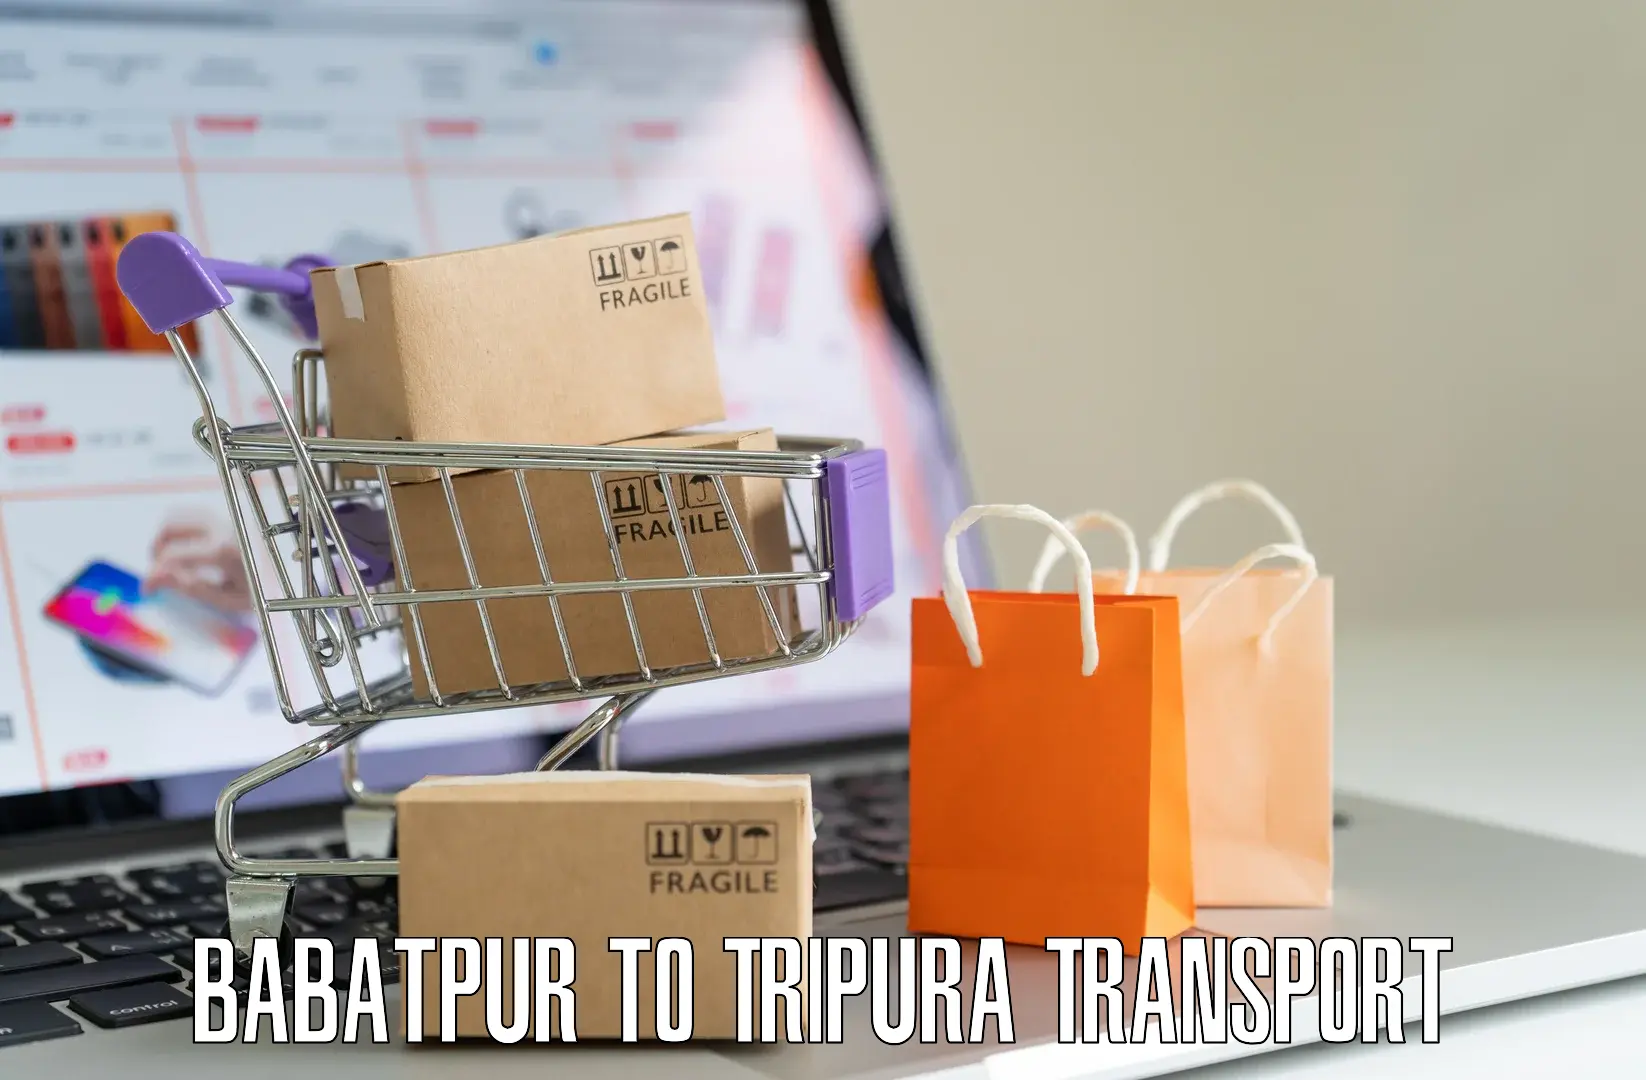 Commercial transport service Babatpur to North Tripura